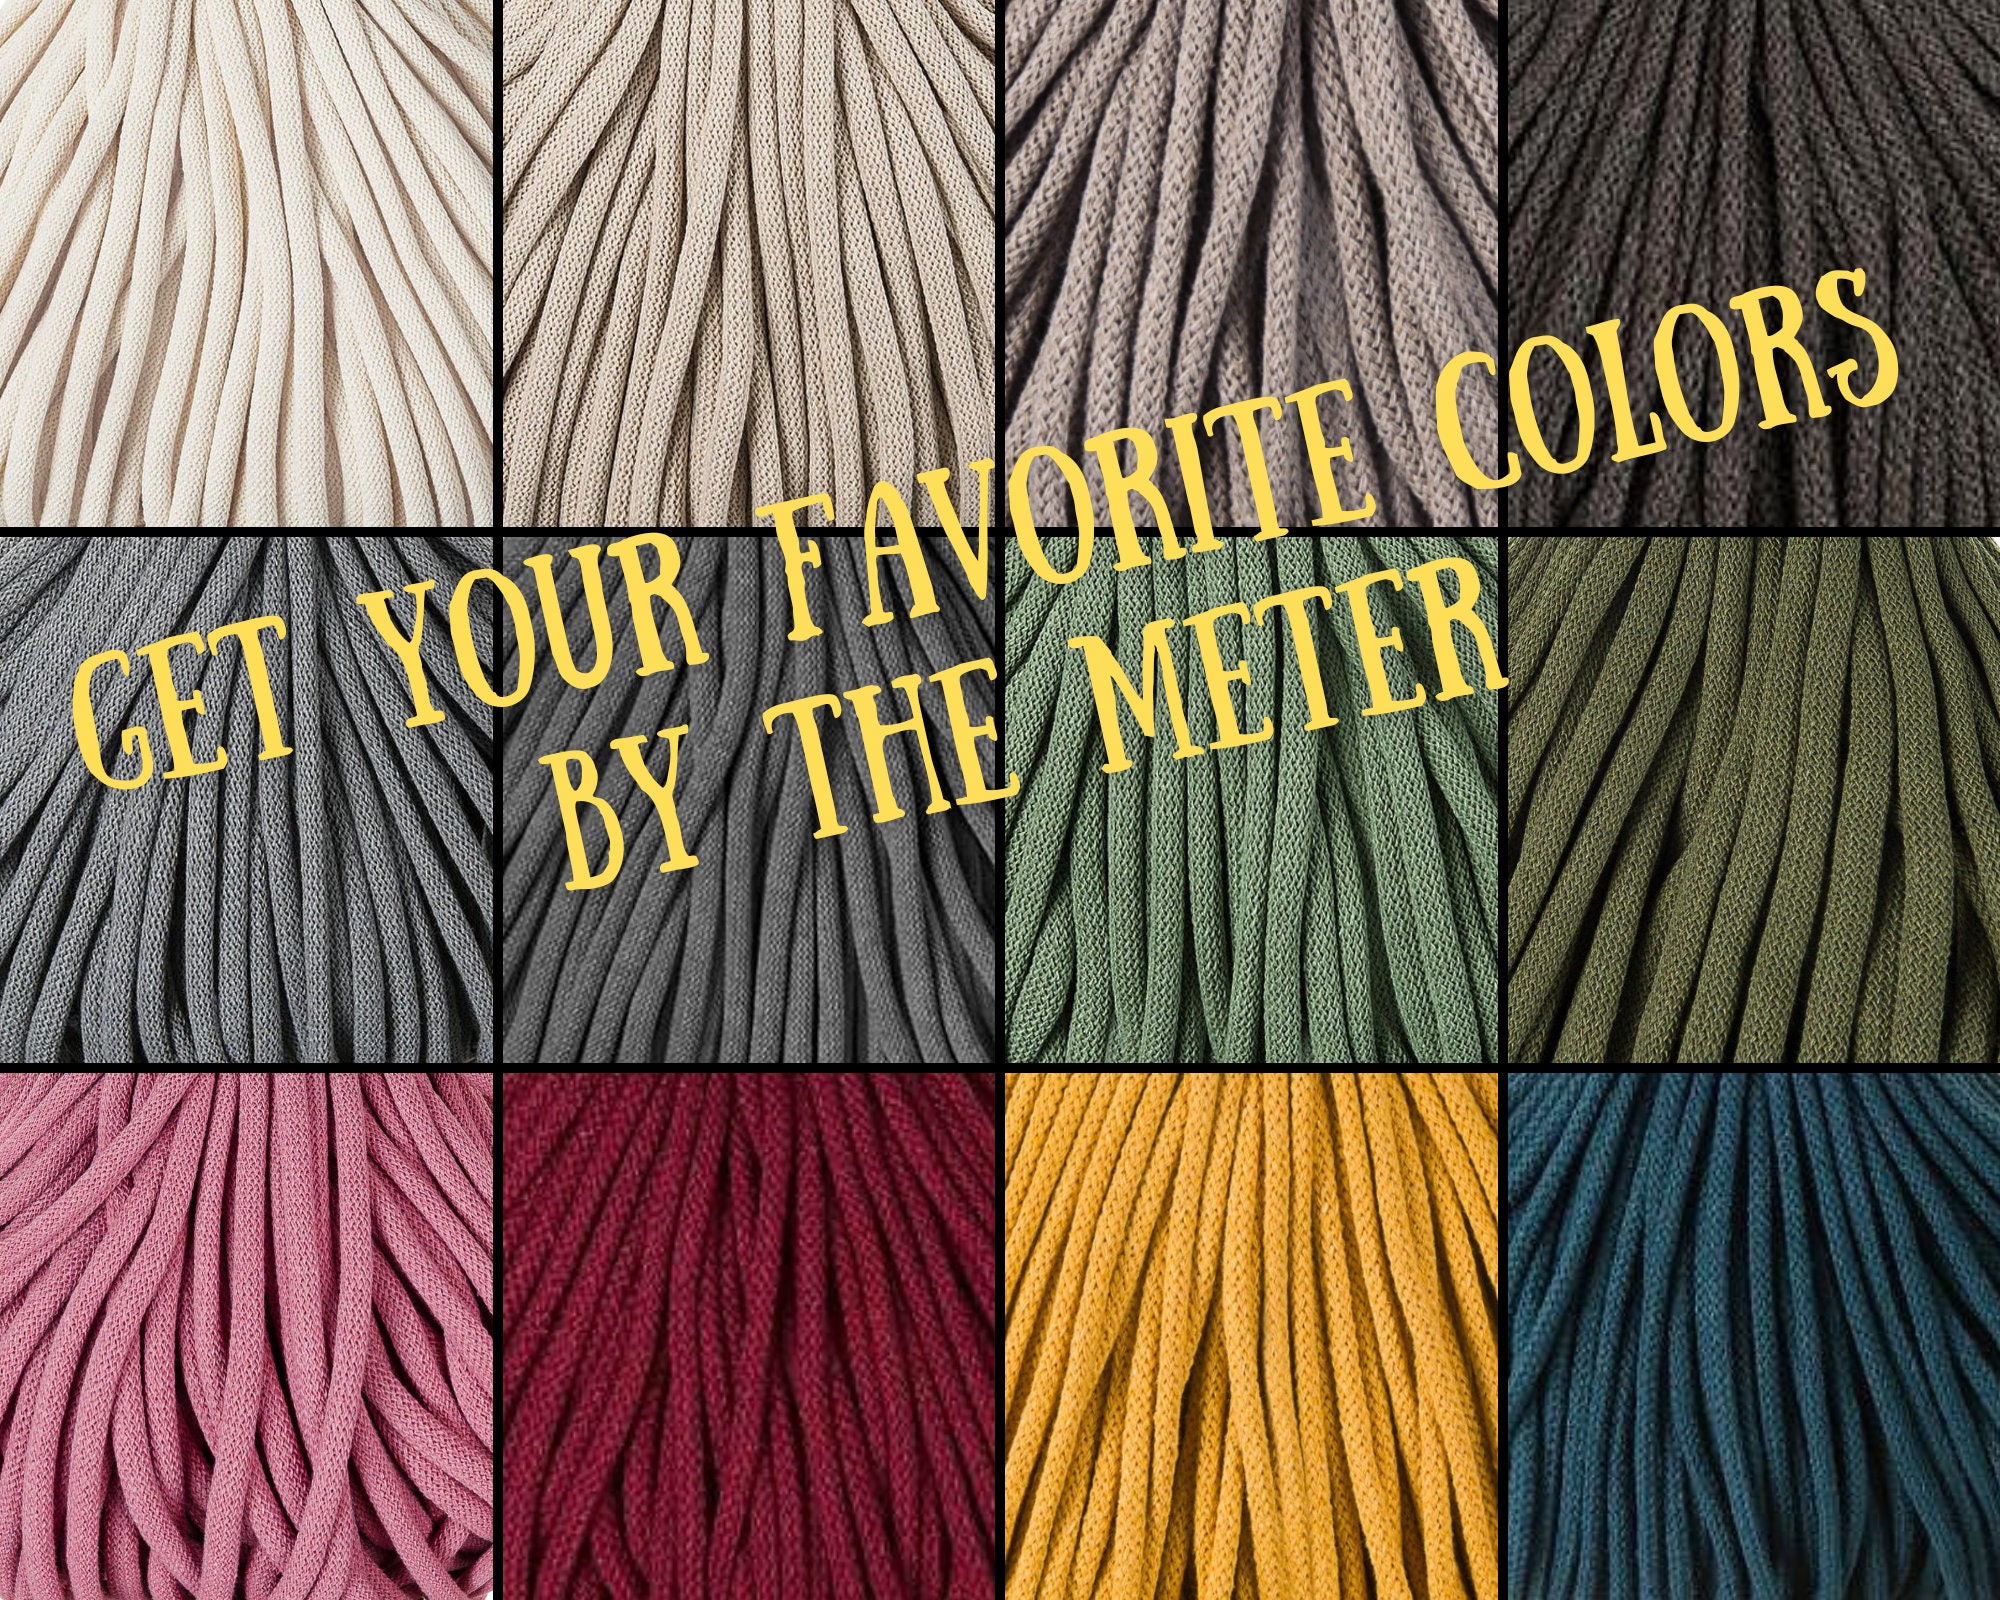 5 Mm 0.2 Single Twisted Macrame Cord 100m 328ft 29 Colors 100% Cotton,  Cotton Twine Rope, Macrame Cord 5mm Feathers and Leaves 